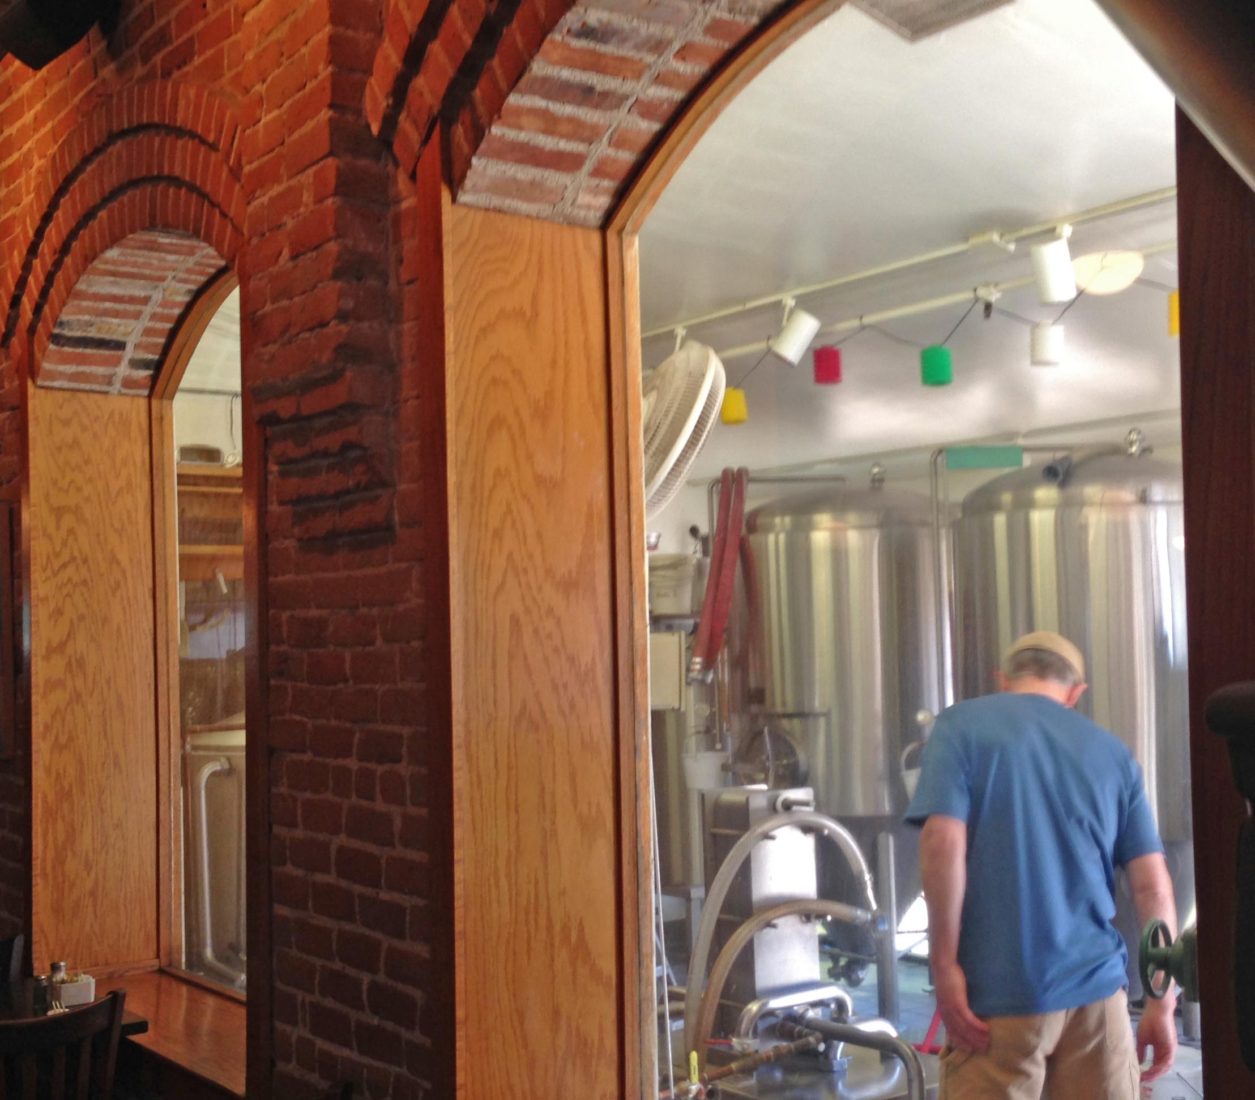 201. Coopersmith’s Pub & Brewery, Ft. Collins CO 2014